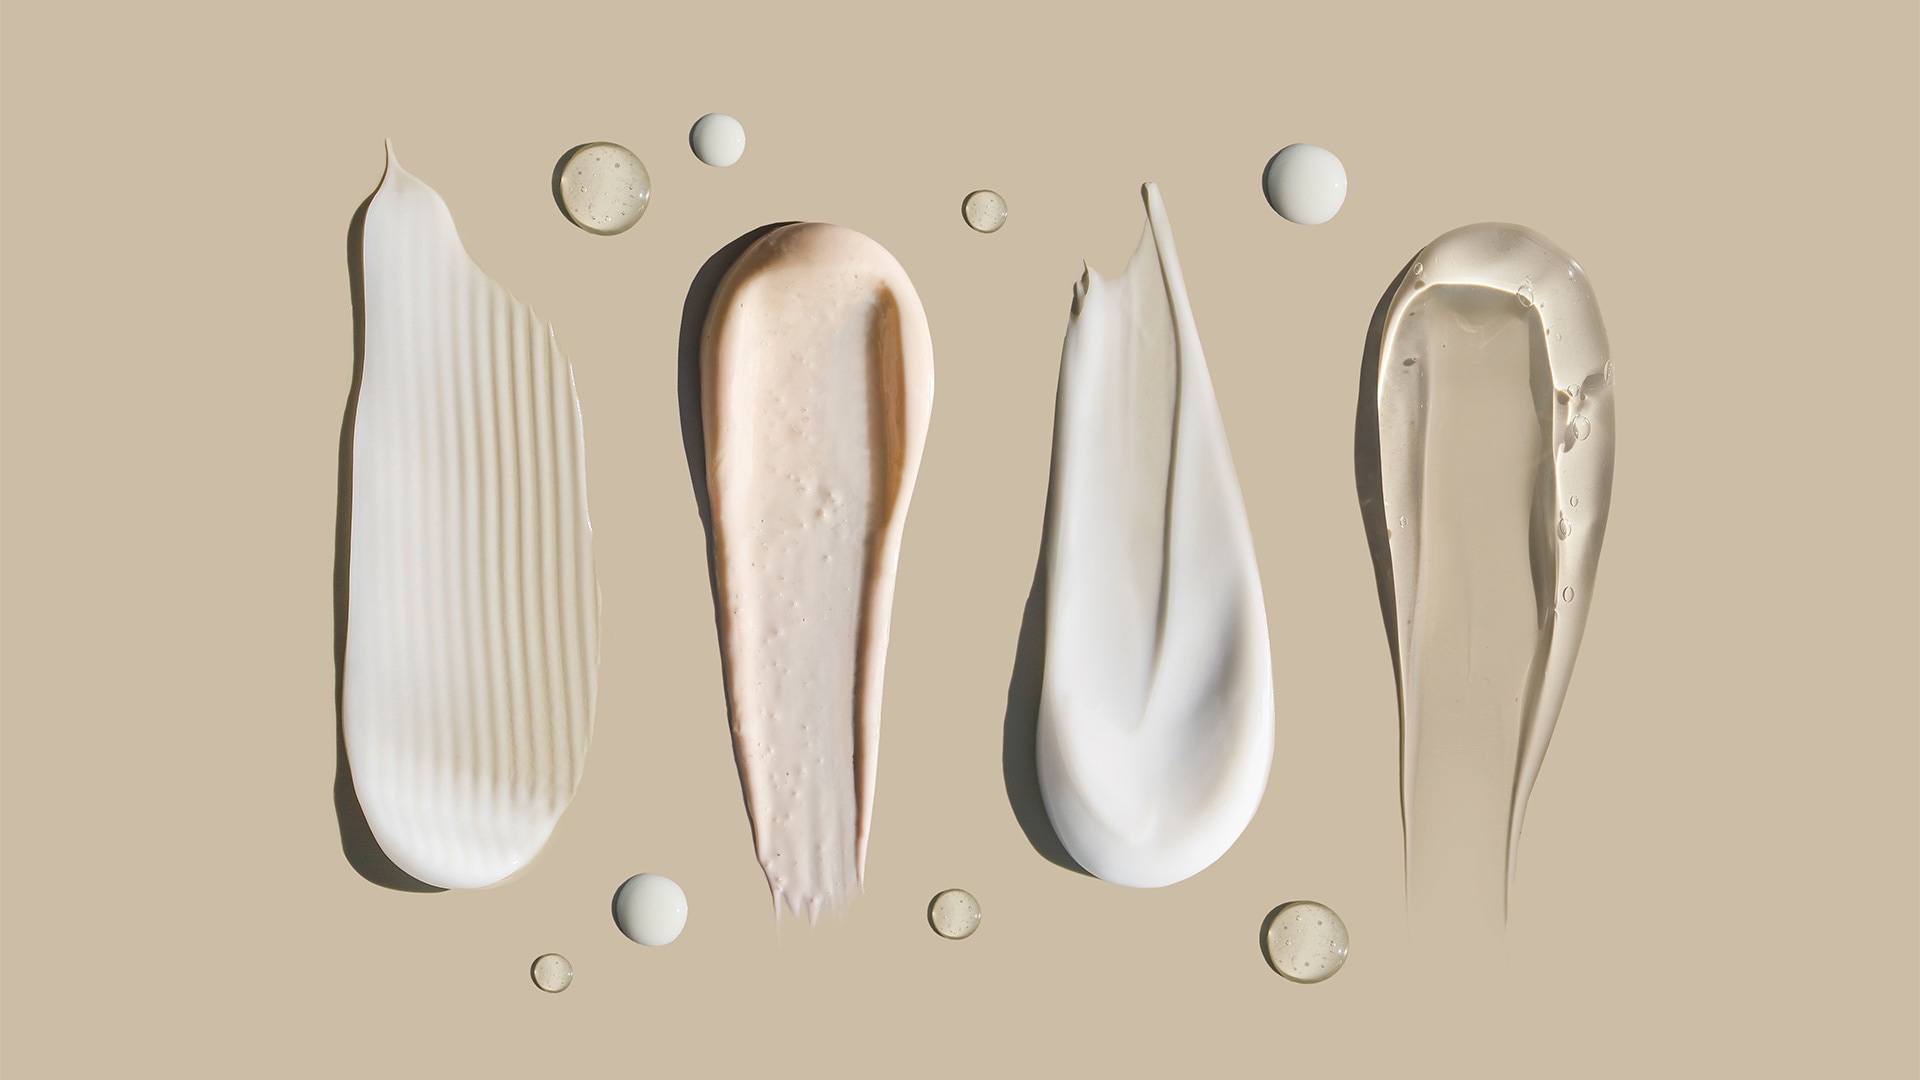 Smears of skincare products with different consistency on a pastel background